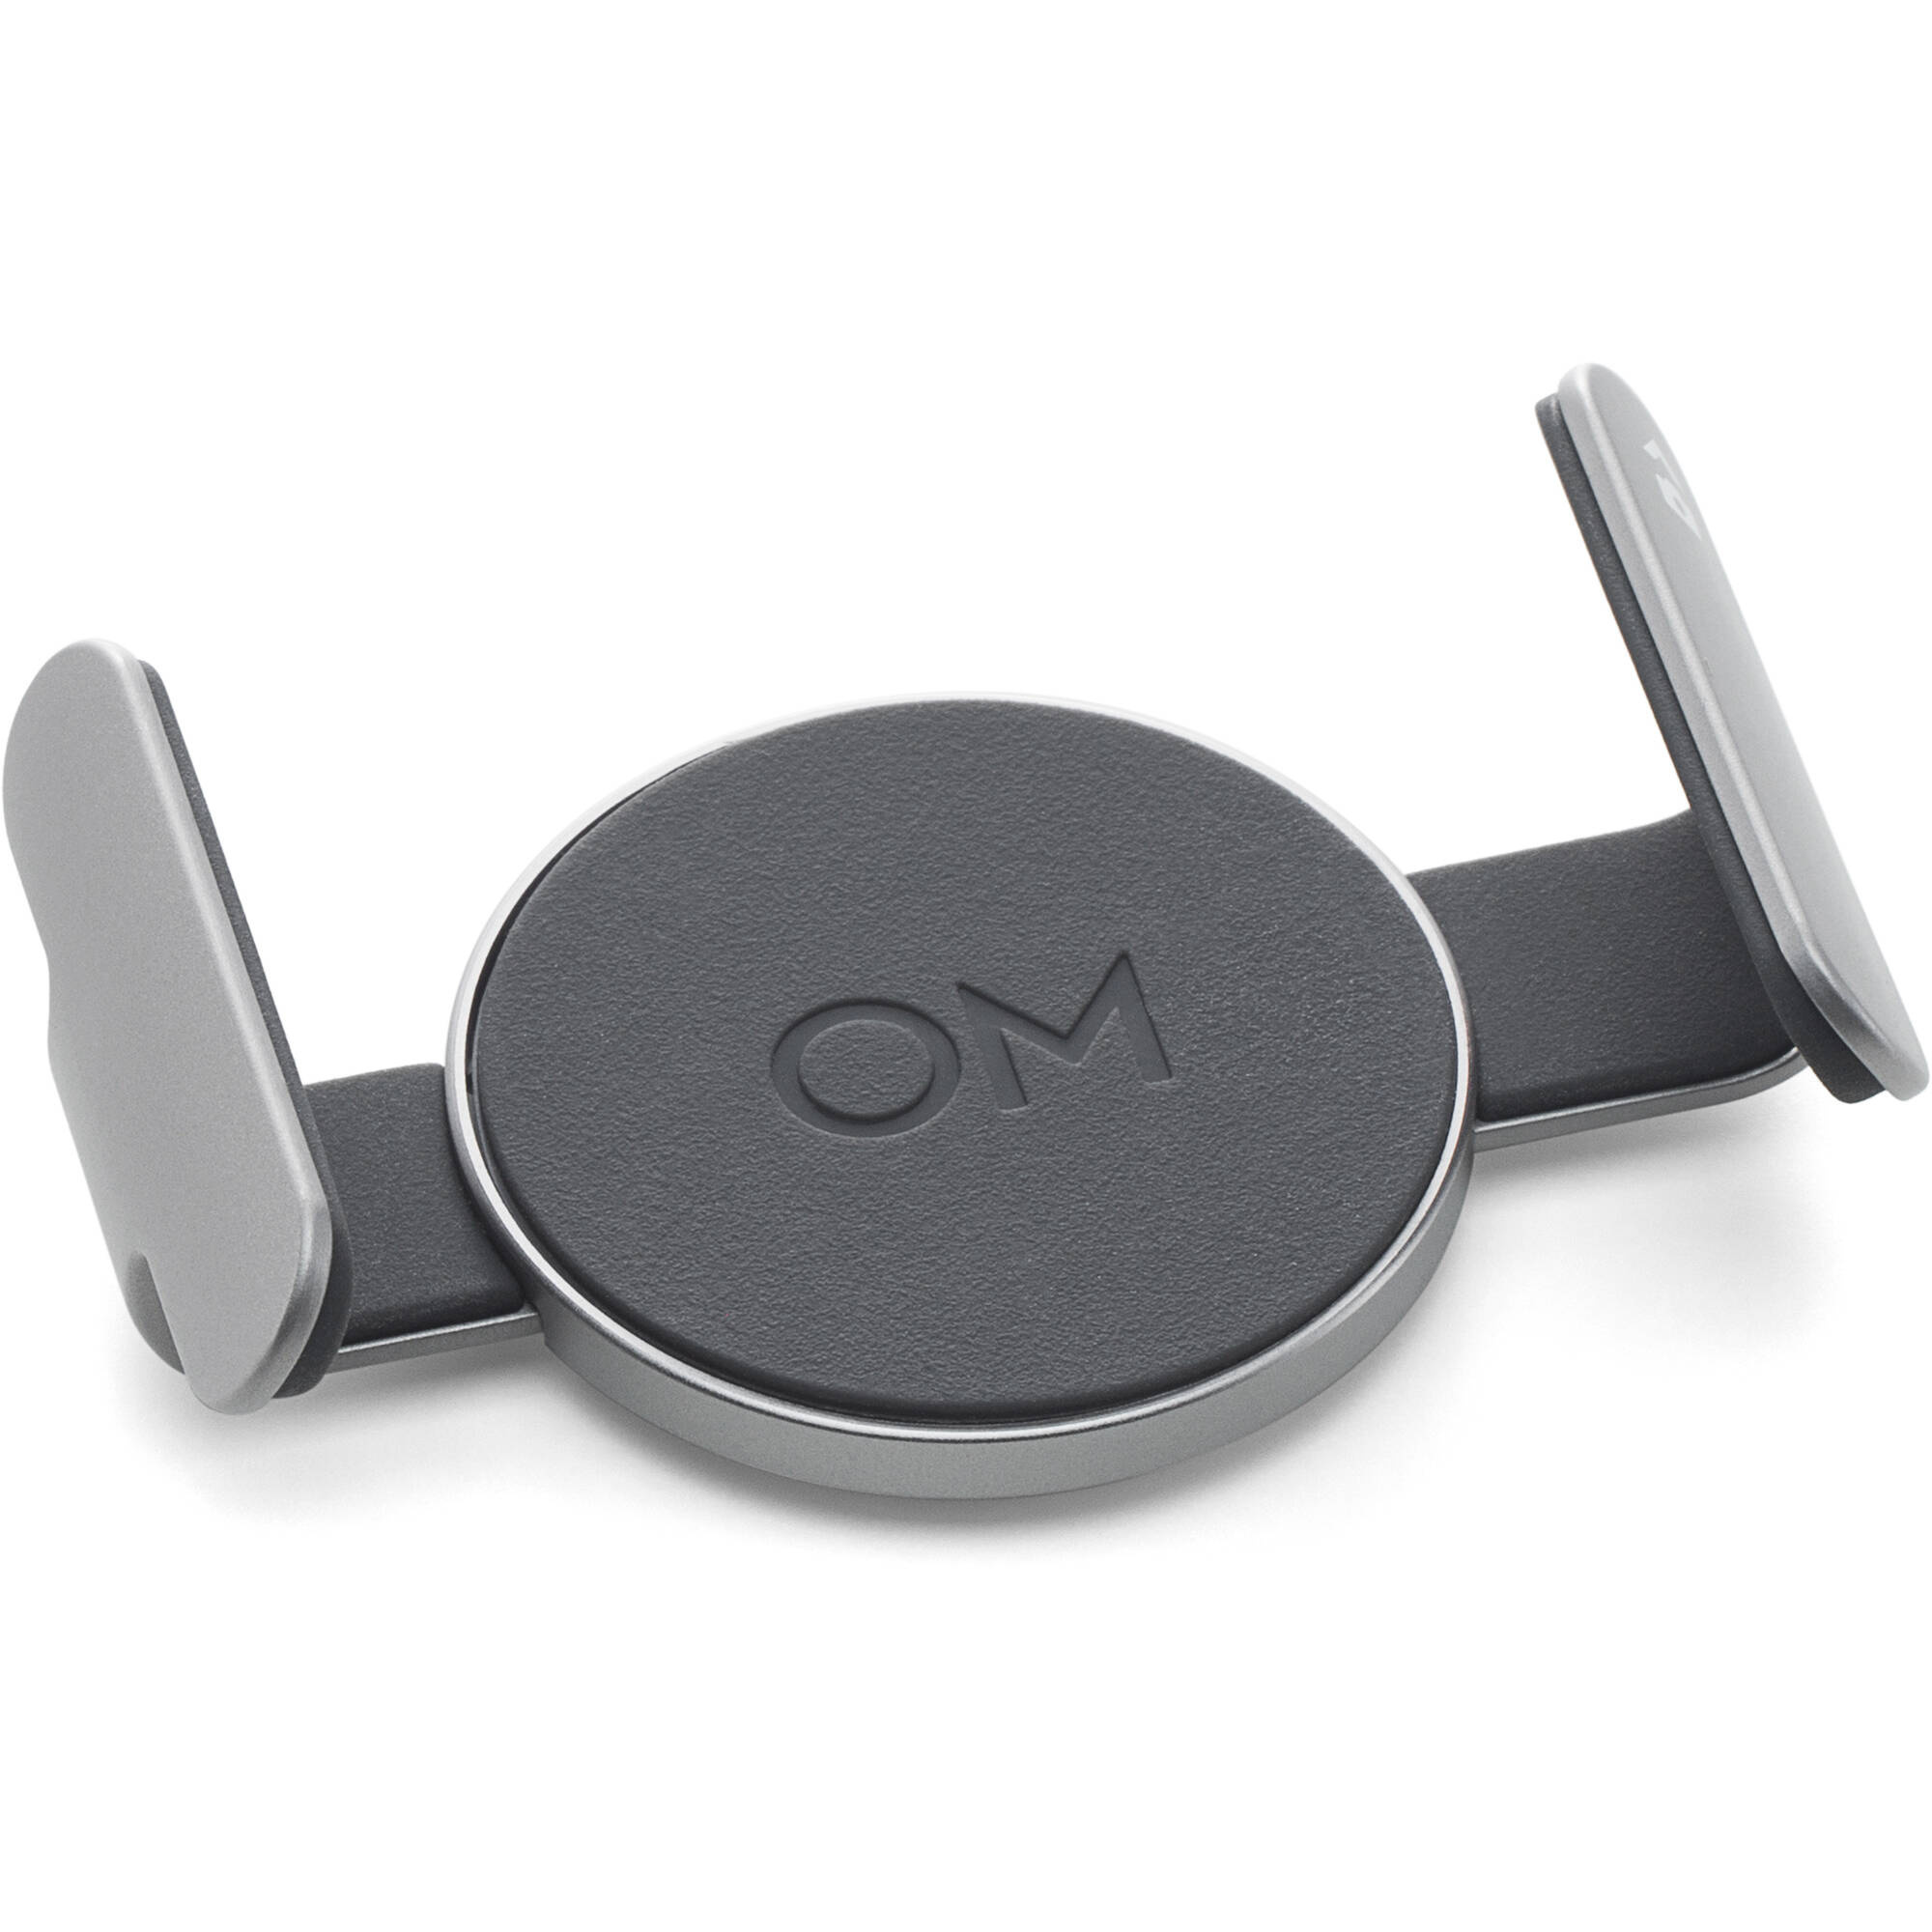 DJI Magnetic Phone Clamp 3 for Osmo Mobile 6